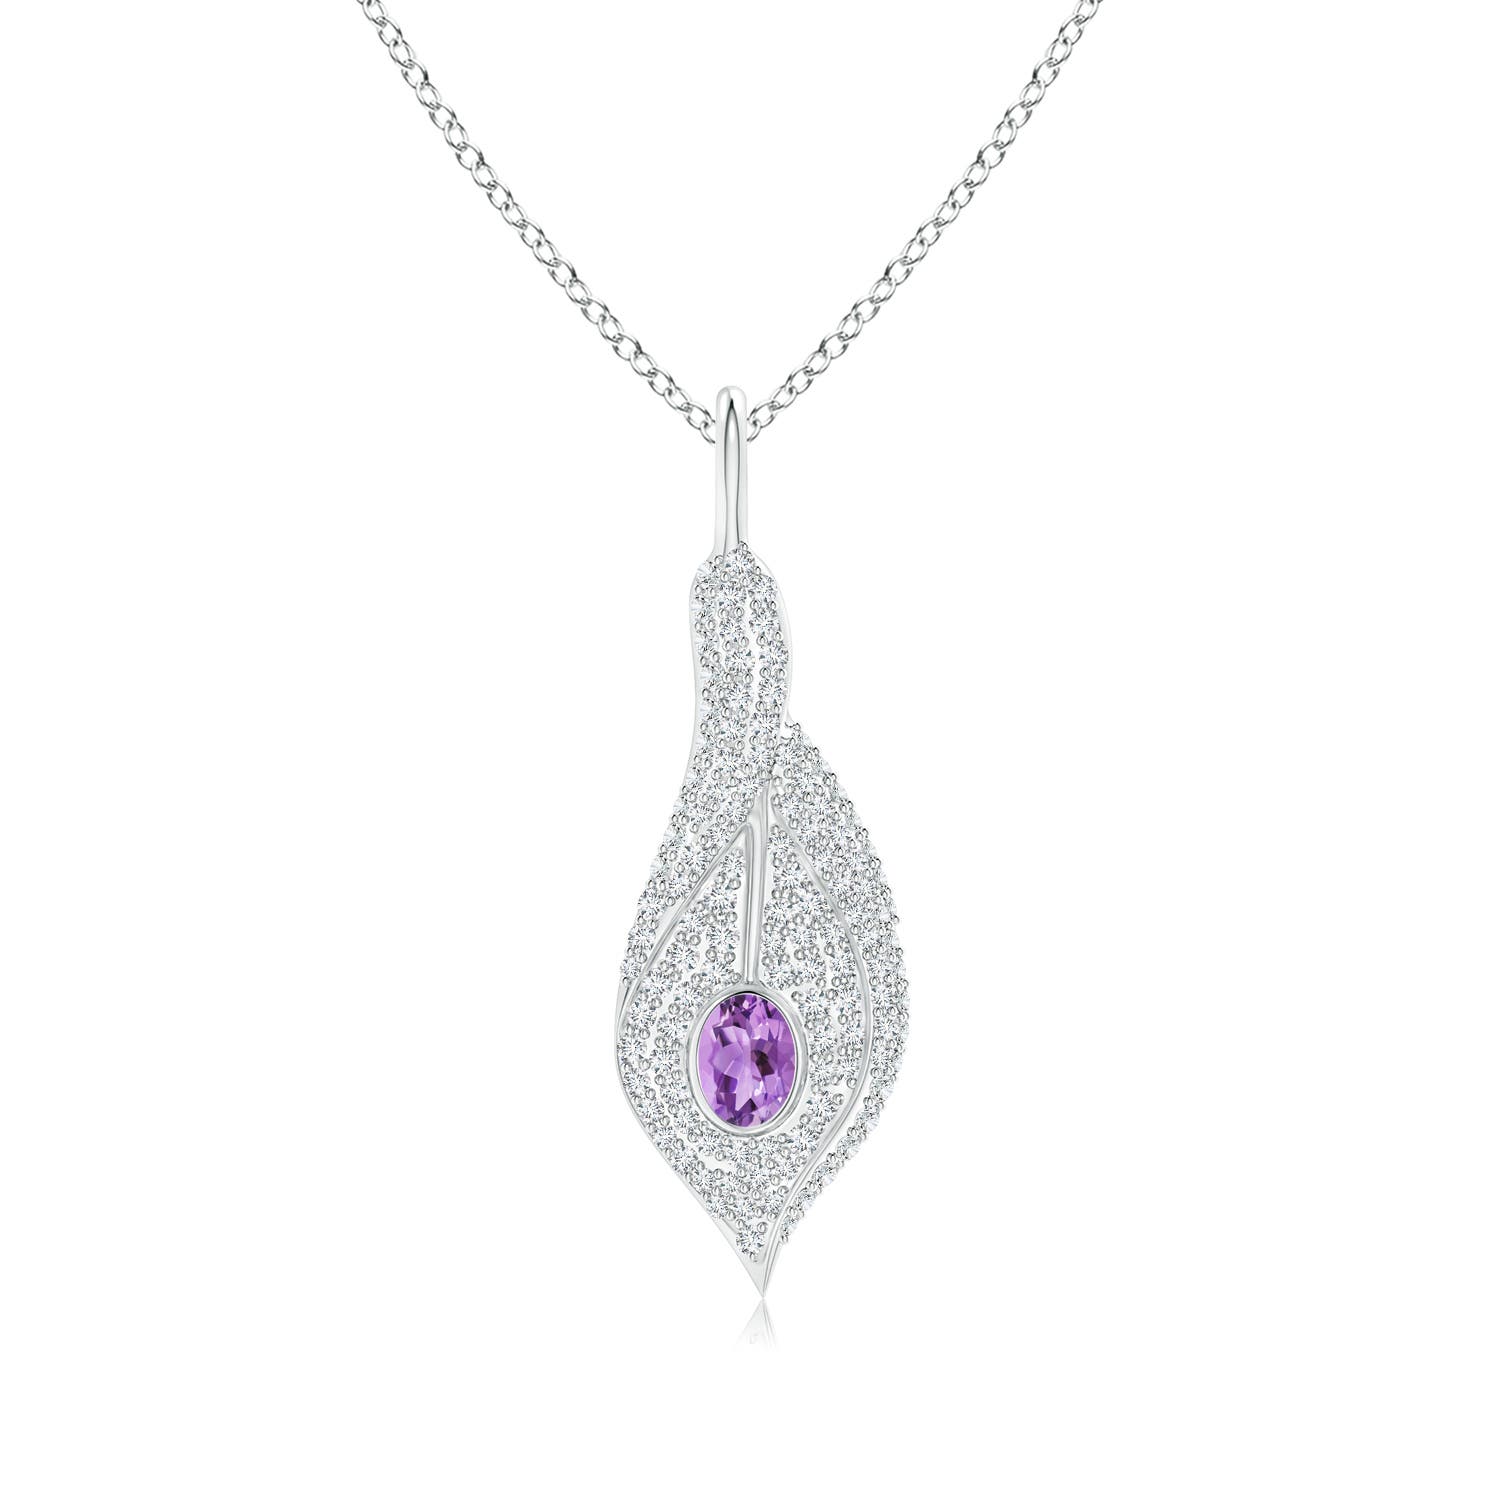 A - Amethyst / 0.61 CT / 14 KT White Gold